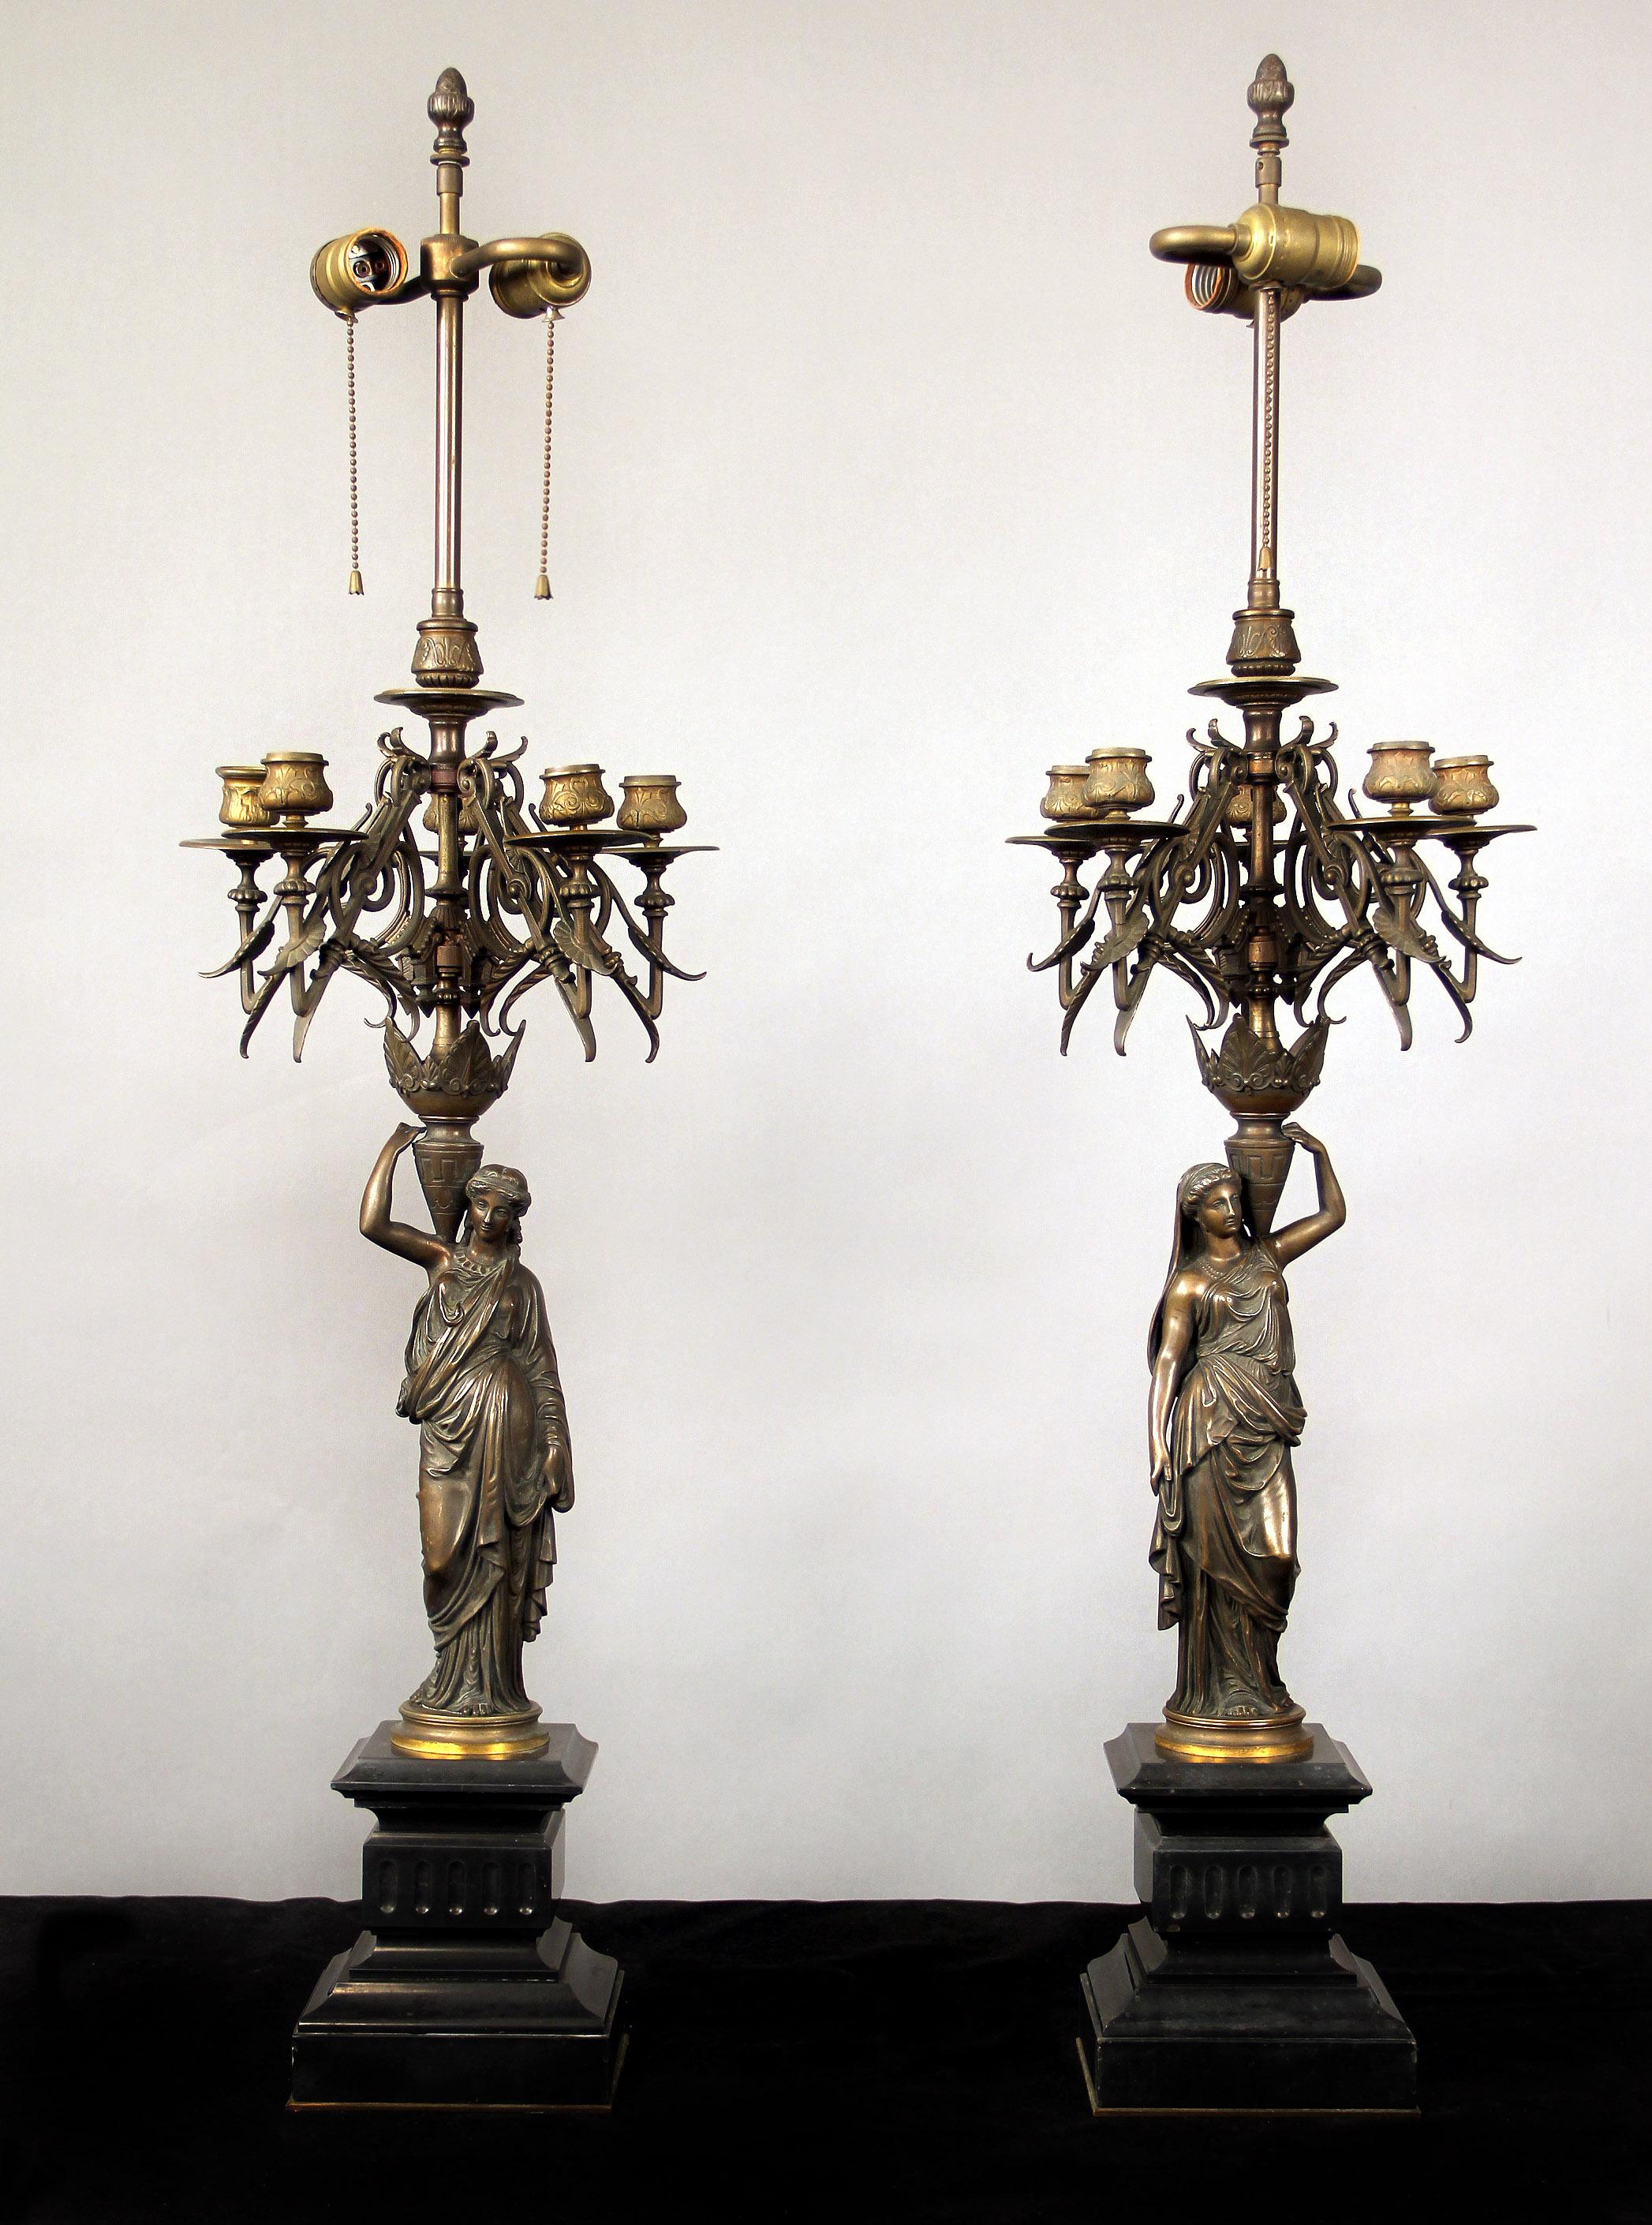 A nice pair of late 19th century patina bronze two light figural candelabra lamps

Each cast as a female figure in draped garment upholding candelabra with five perimeter arms and one centered leading up to two lights, standing on a black marble